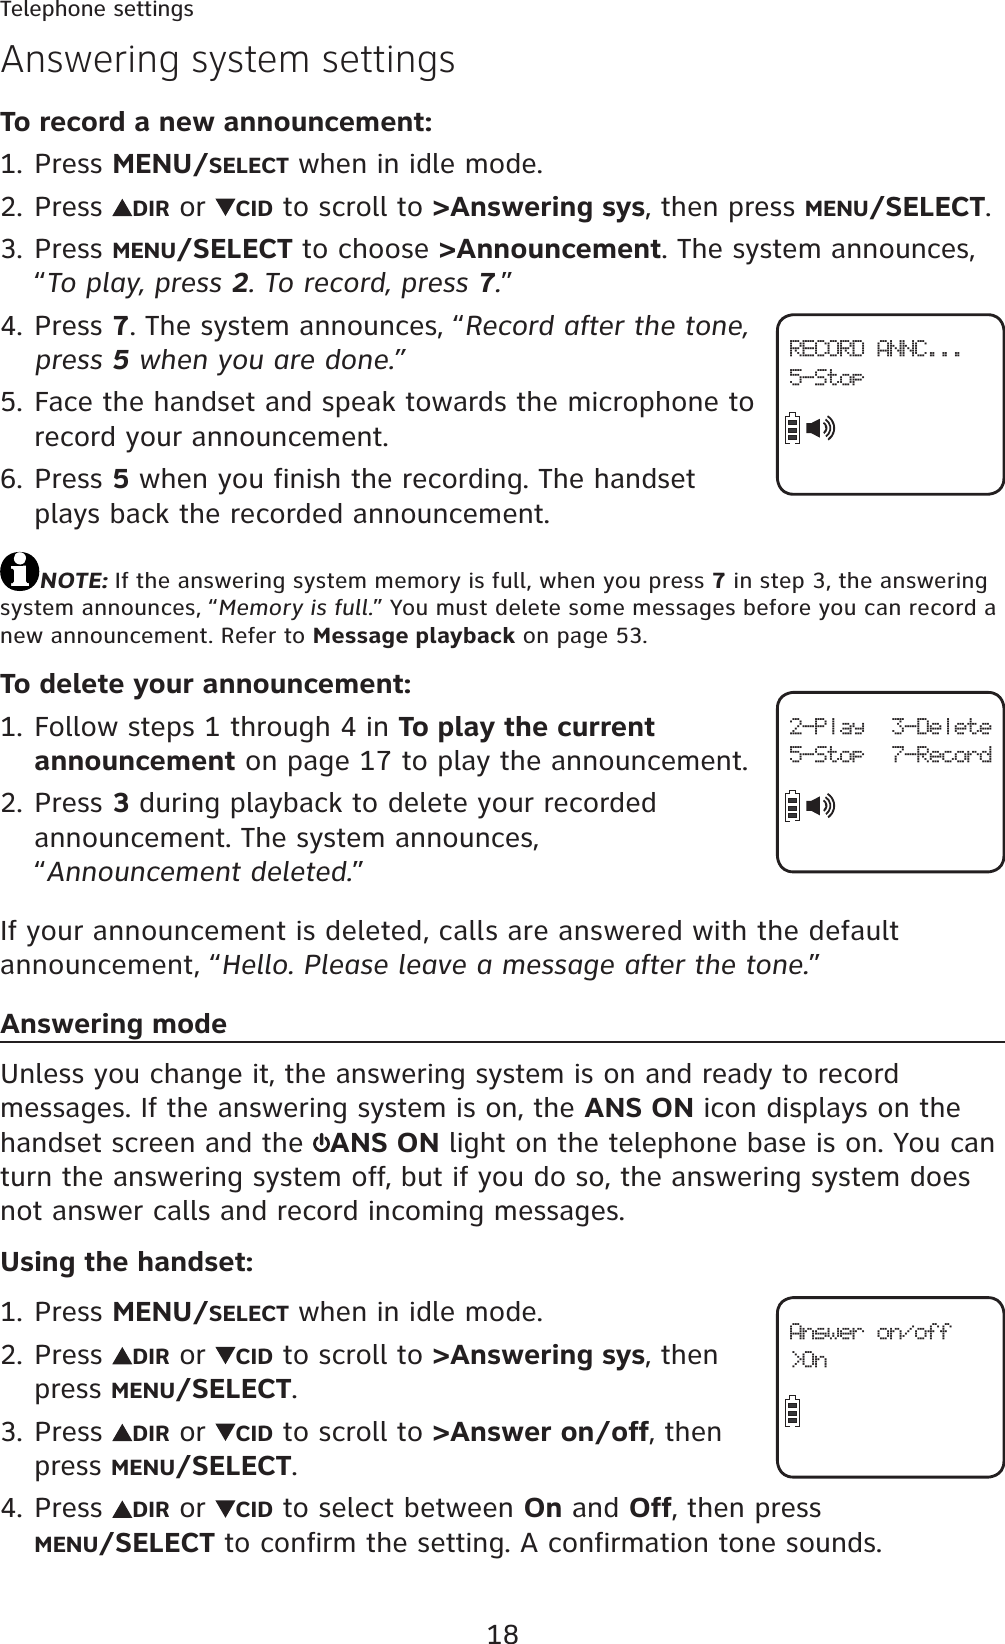 18Telephone settingsTo record a new announcement:Press MENU/SELECT when in idle mode.Press  DIR or  CID to scroll to &gt;Answering sys, then press MENU/SELECT.Press MENU/SELECT to choose &gt;Announcement. The system announces, “To play, press 2. To record, press 7.”Press 7. The system announces, “Record after the tone, press 5 when you are done.”Face the handset and speak towards the microphone to record your announcement.Press 5 when you finish the recording. The handset plays back the recorded announcement.NOTE: If the answering system memory is full, when you press 7 in step 3, the answering system announces, “Memory is full.” You must delete some messages before you can record a new announcement. Refer to Message playback on page 53.To delete your announcement:Follow steps 1 through 4 in To play the current announcement on page 17 to play the announcement.Press 3 during playback to delete your recorded announcement. The system announces, “Announcement deleted.”If your announcement is deleted, calls are answered with the default announcement, “Hello. Please leave a message after the tone.”Answering modeUnless you change it, the answering system is on and ready to record messages. If the answering system is on, the ANS ON icon displays on the handset screen and the  ANS ON light on the telephone base is on. You can turn the answering system off, but if you do so, the answering system does not answer calls and record incoming messages.Using the handset:Press MENU/SELECT when in idle mode.Press  DIR or  CID to scroll to &gt;Answering sys, then press MENU/SELECT.Press  DIR or  CID to scroll to &gt;Answer on/off, then press MENU/SELECT.Press  DIR or  CID to select between On and Off, then press MENU/SELECT to confirm the setting. A confirmation tone sounds.1.2.3.4.5.6.1.2.1.2.3.4.Answering system settings2-Play 3-Delete5-Stop 7-RecordAnswer on/off&gt;OnRECORD ANNC...5-Stop